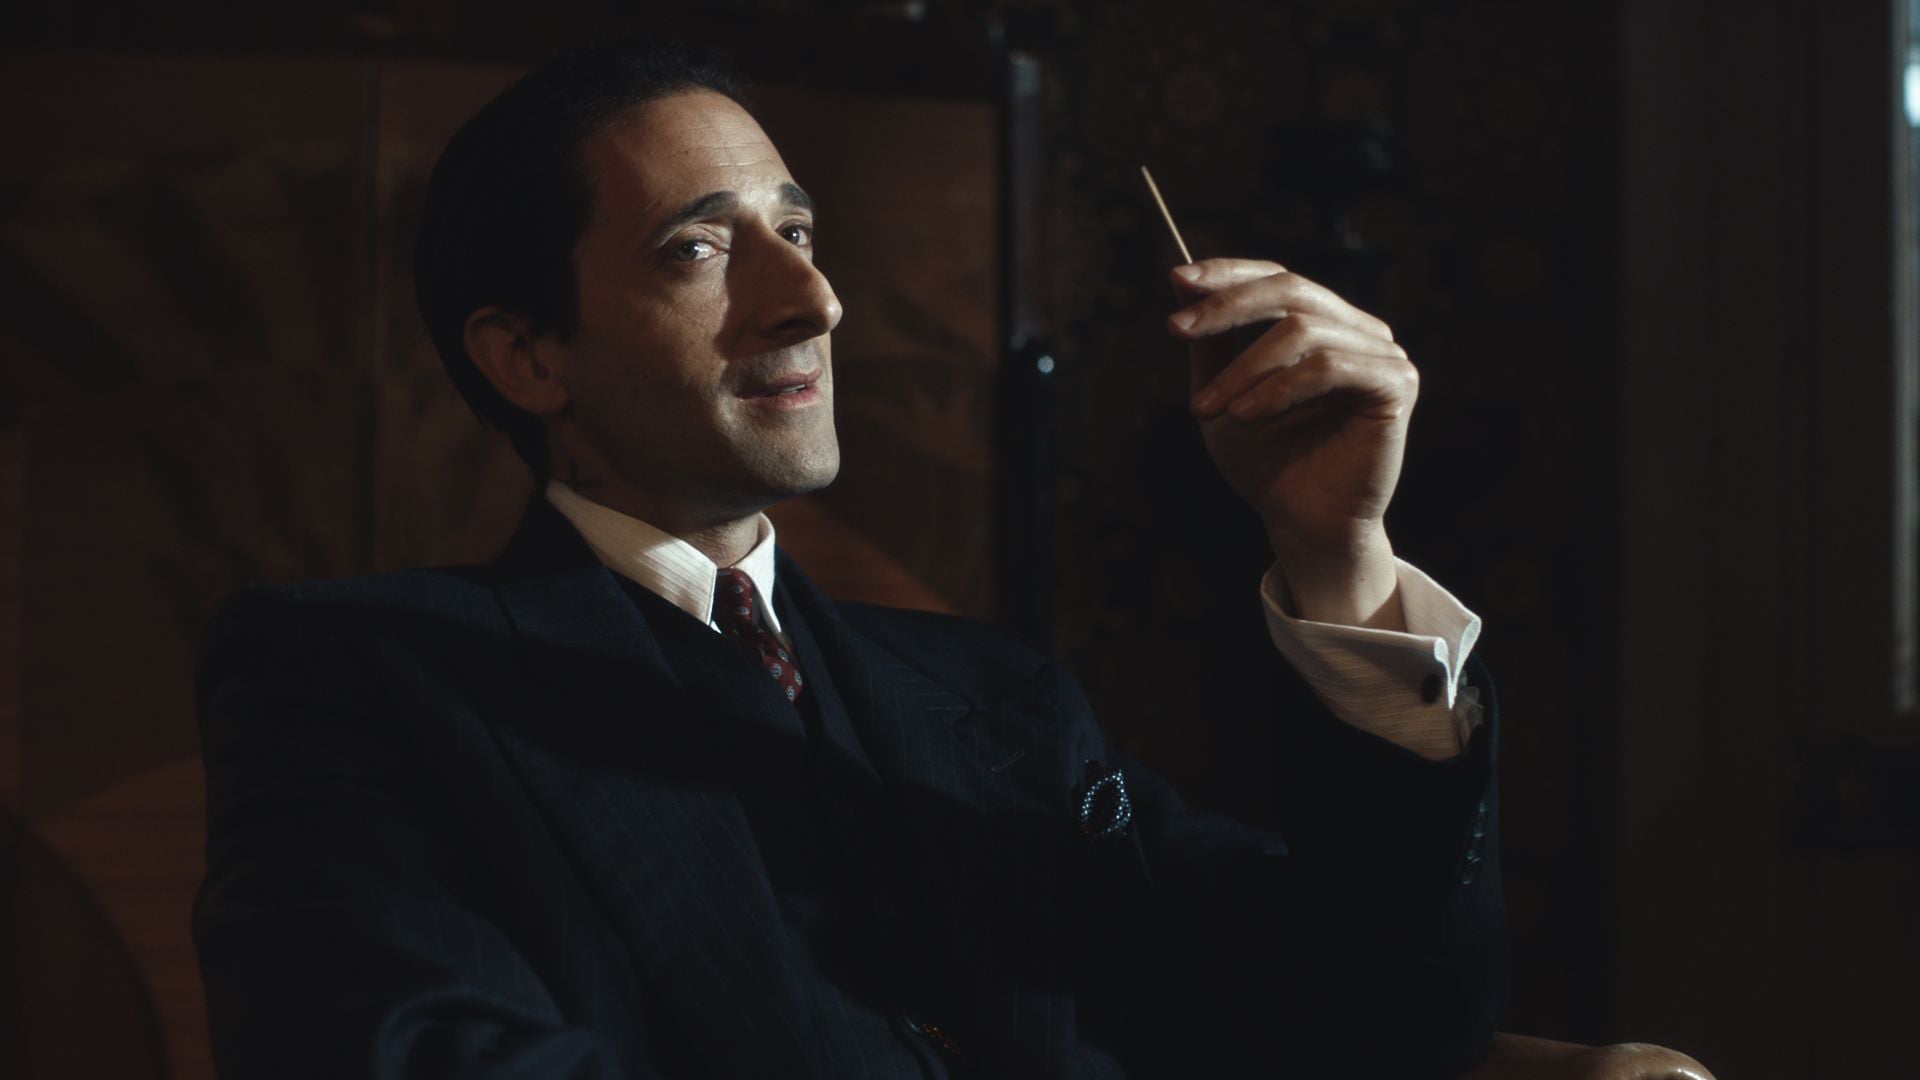 PEAKY BLINDERS, Adrien Brody in 'Heathens' (Season 4, Episode 2, aired November 15, 2017). Netflix/courtesy Everett Collection